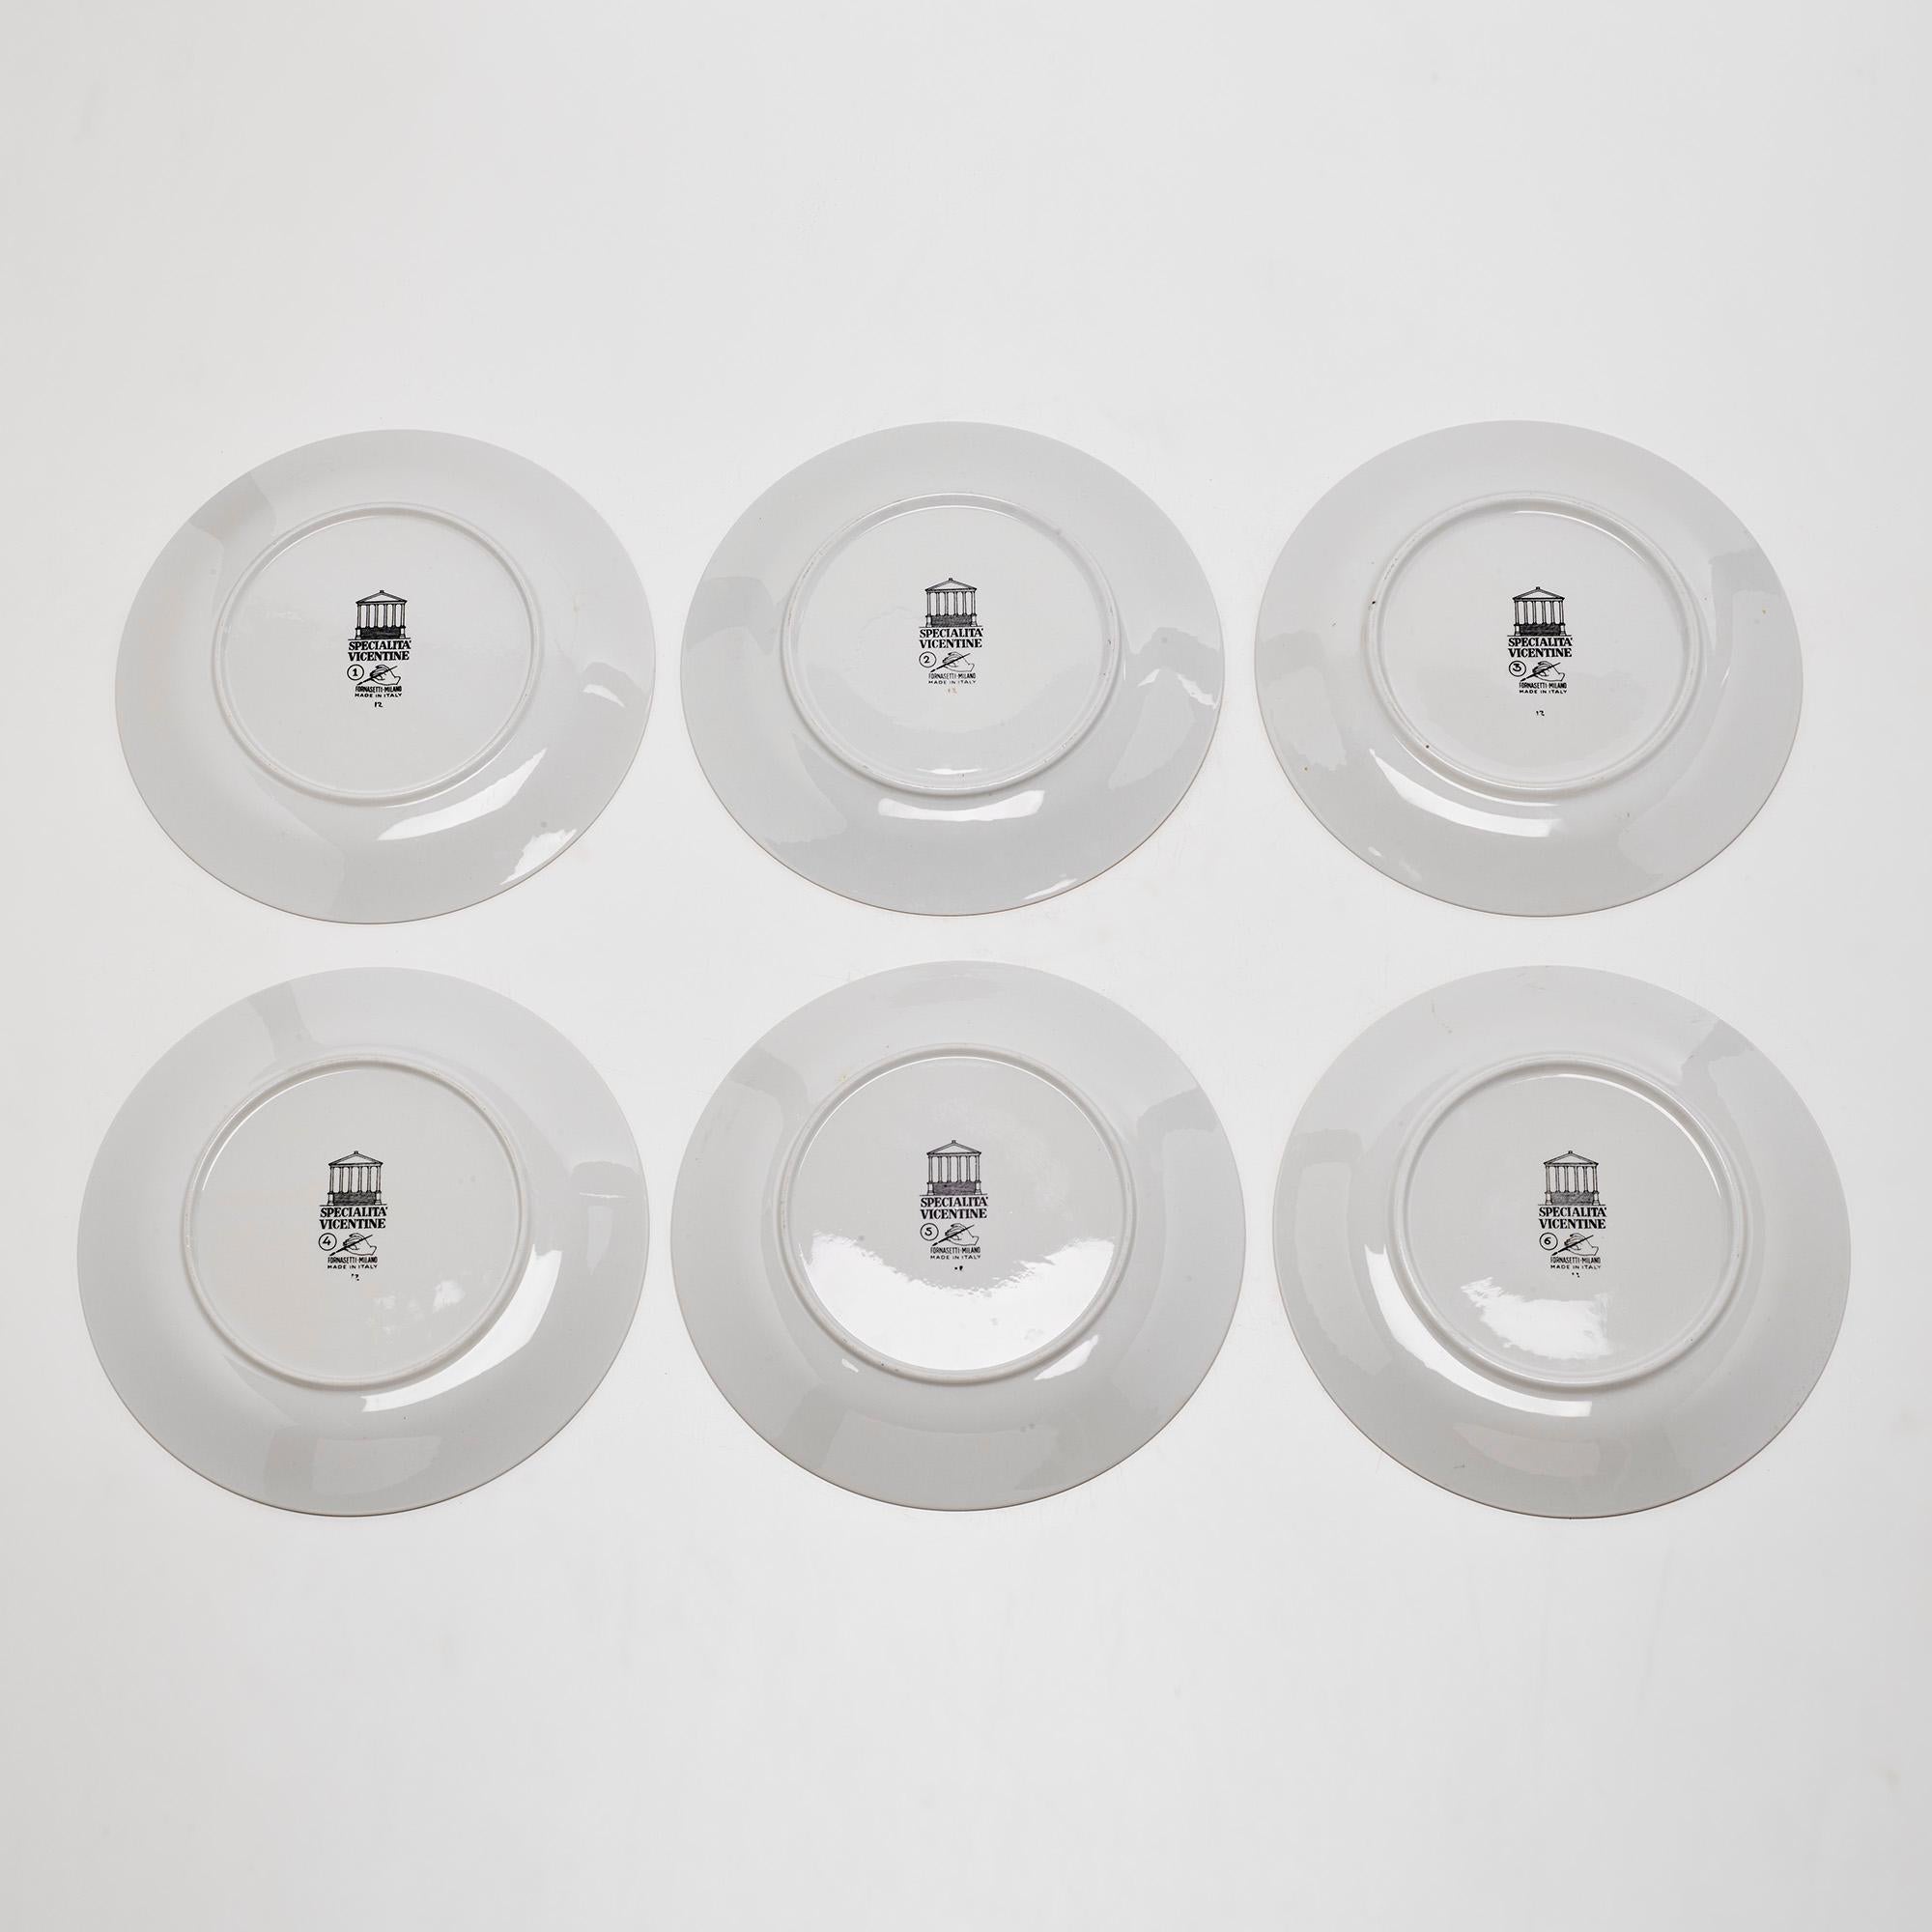 Late 20th Century Set of Twelve Specialità Vicente Plates by Piero Fornasetti